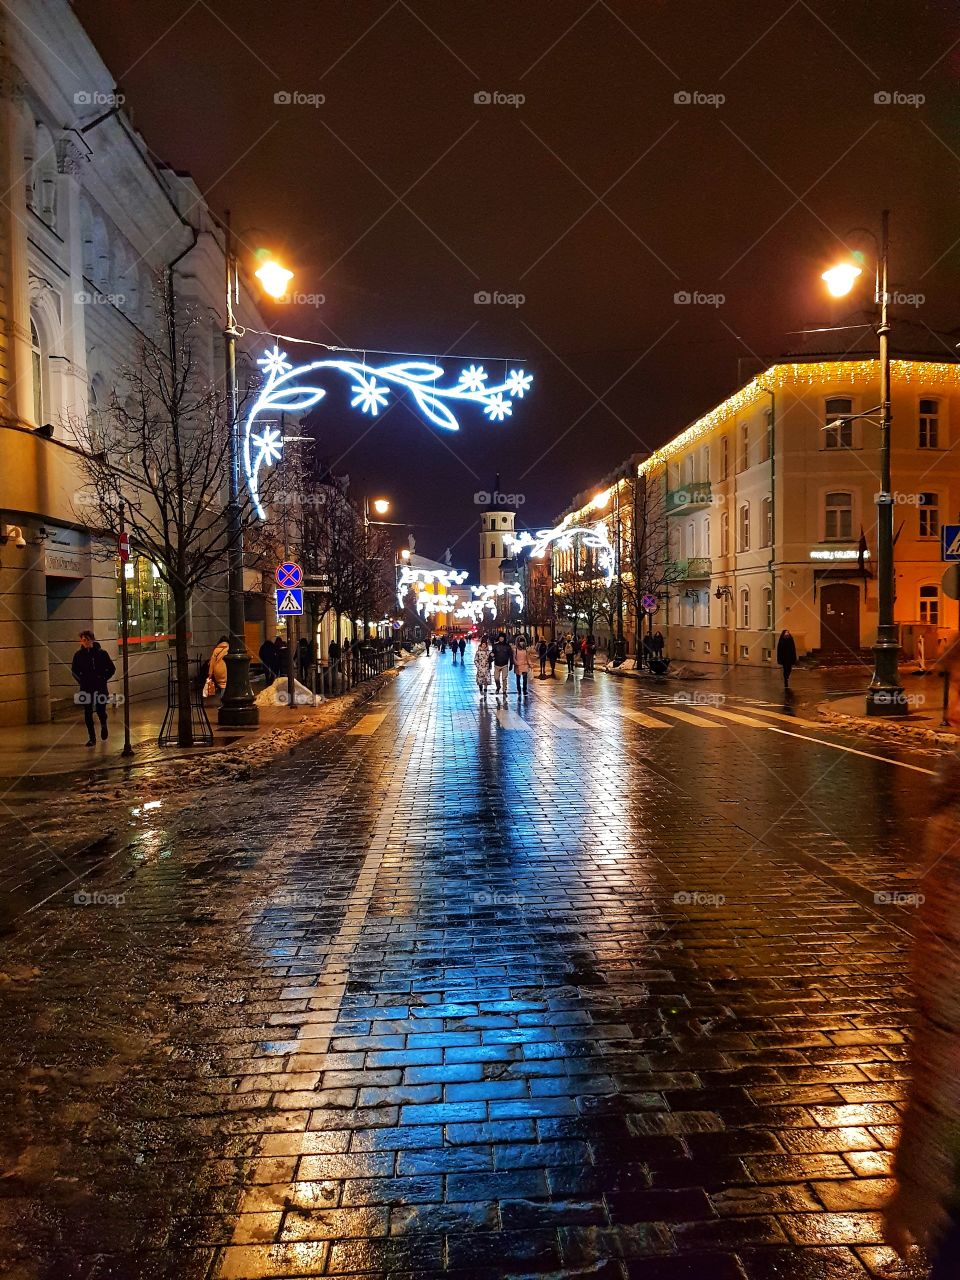 The beautiful Vilnius city in the night.